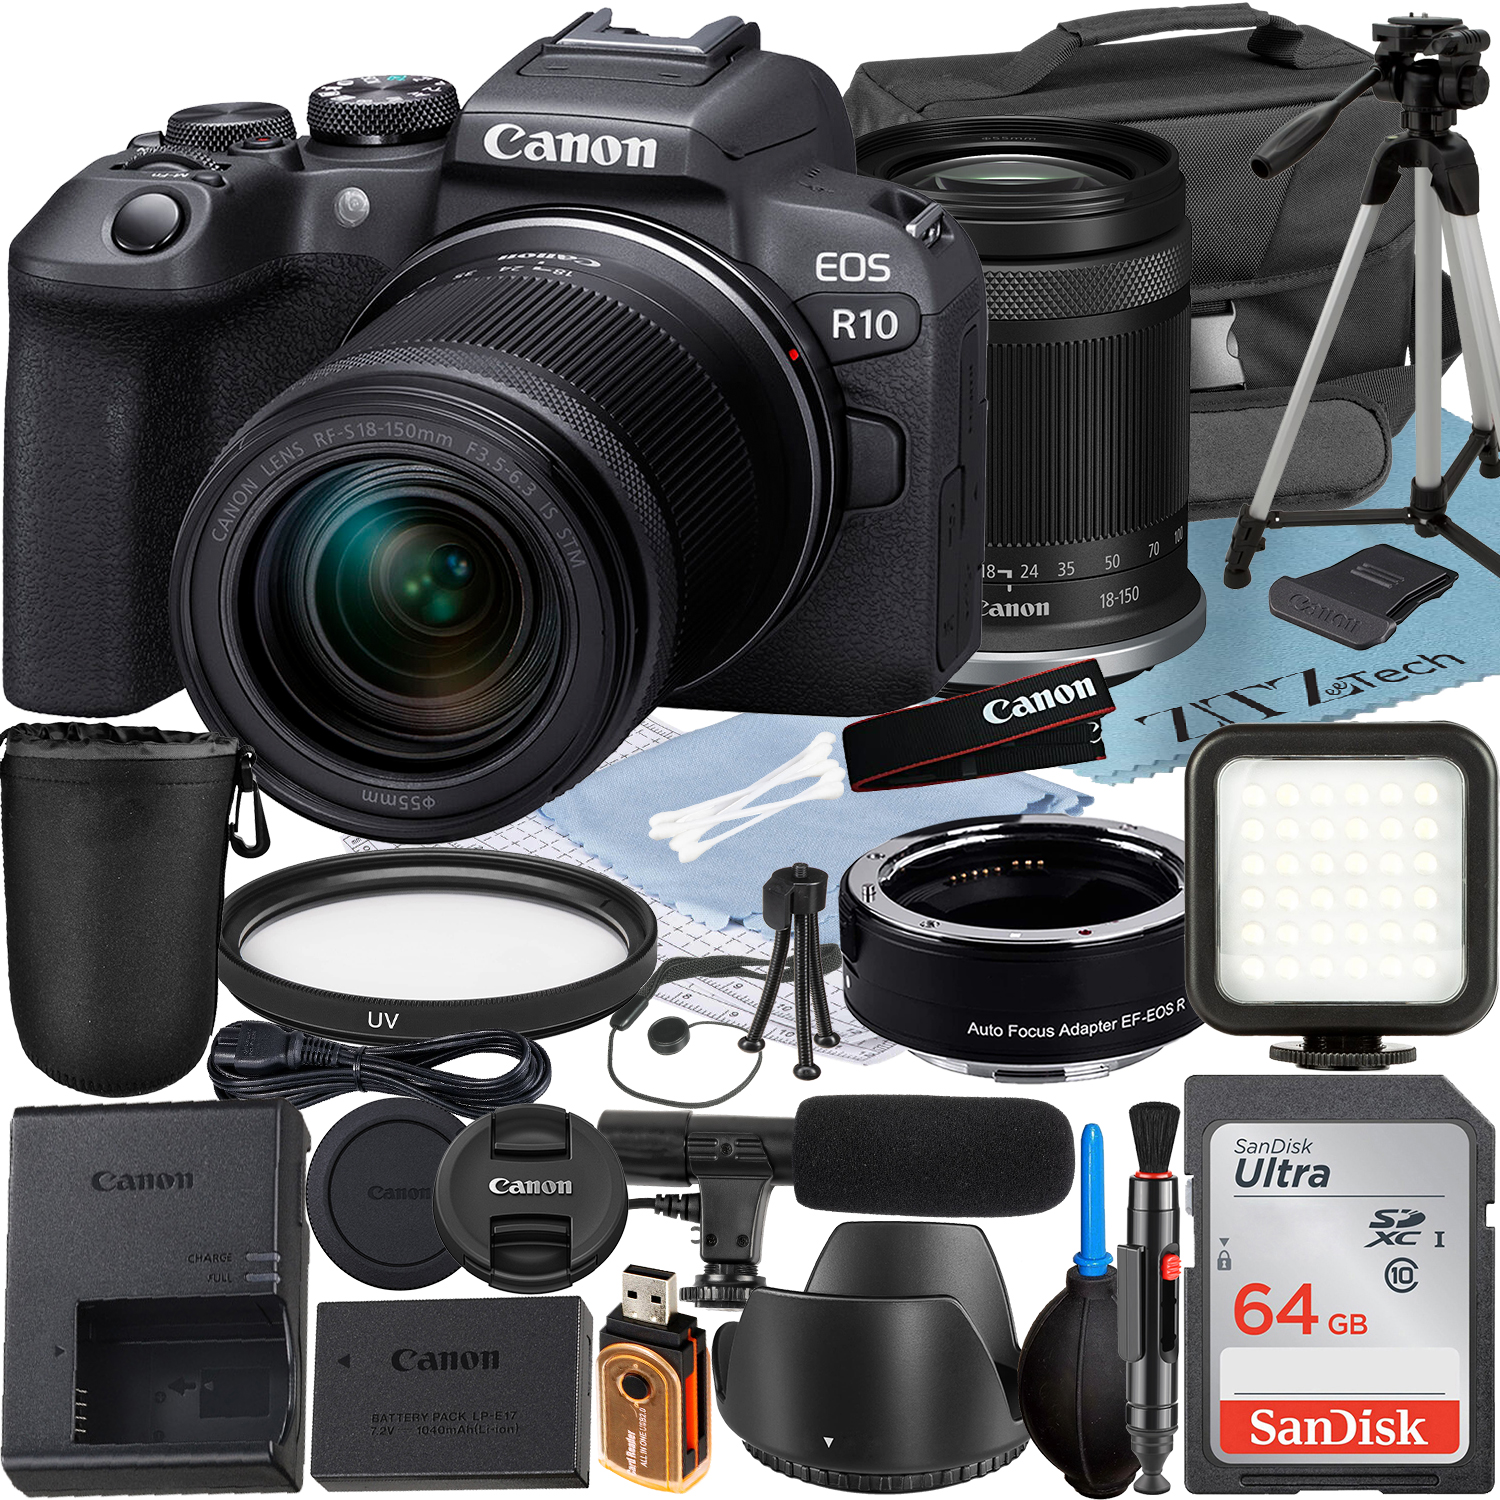 Canon EOS R10 Mirrorless Camera with RF-S 18-150mm Lens + Mount Adapter + SanDisk 64GB Memory Card + Case + LED Flash + ZeeTech Accessory Bundle